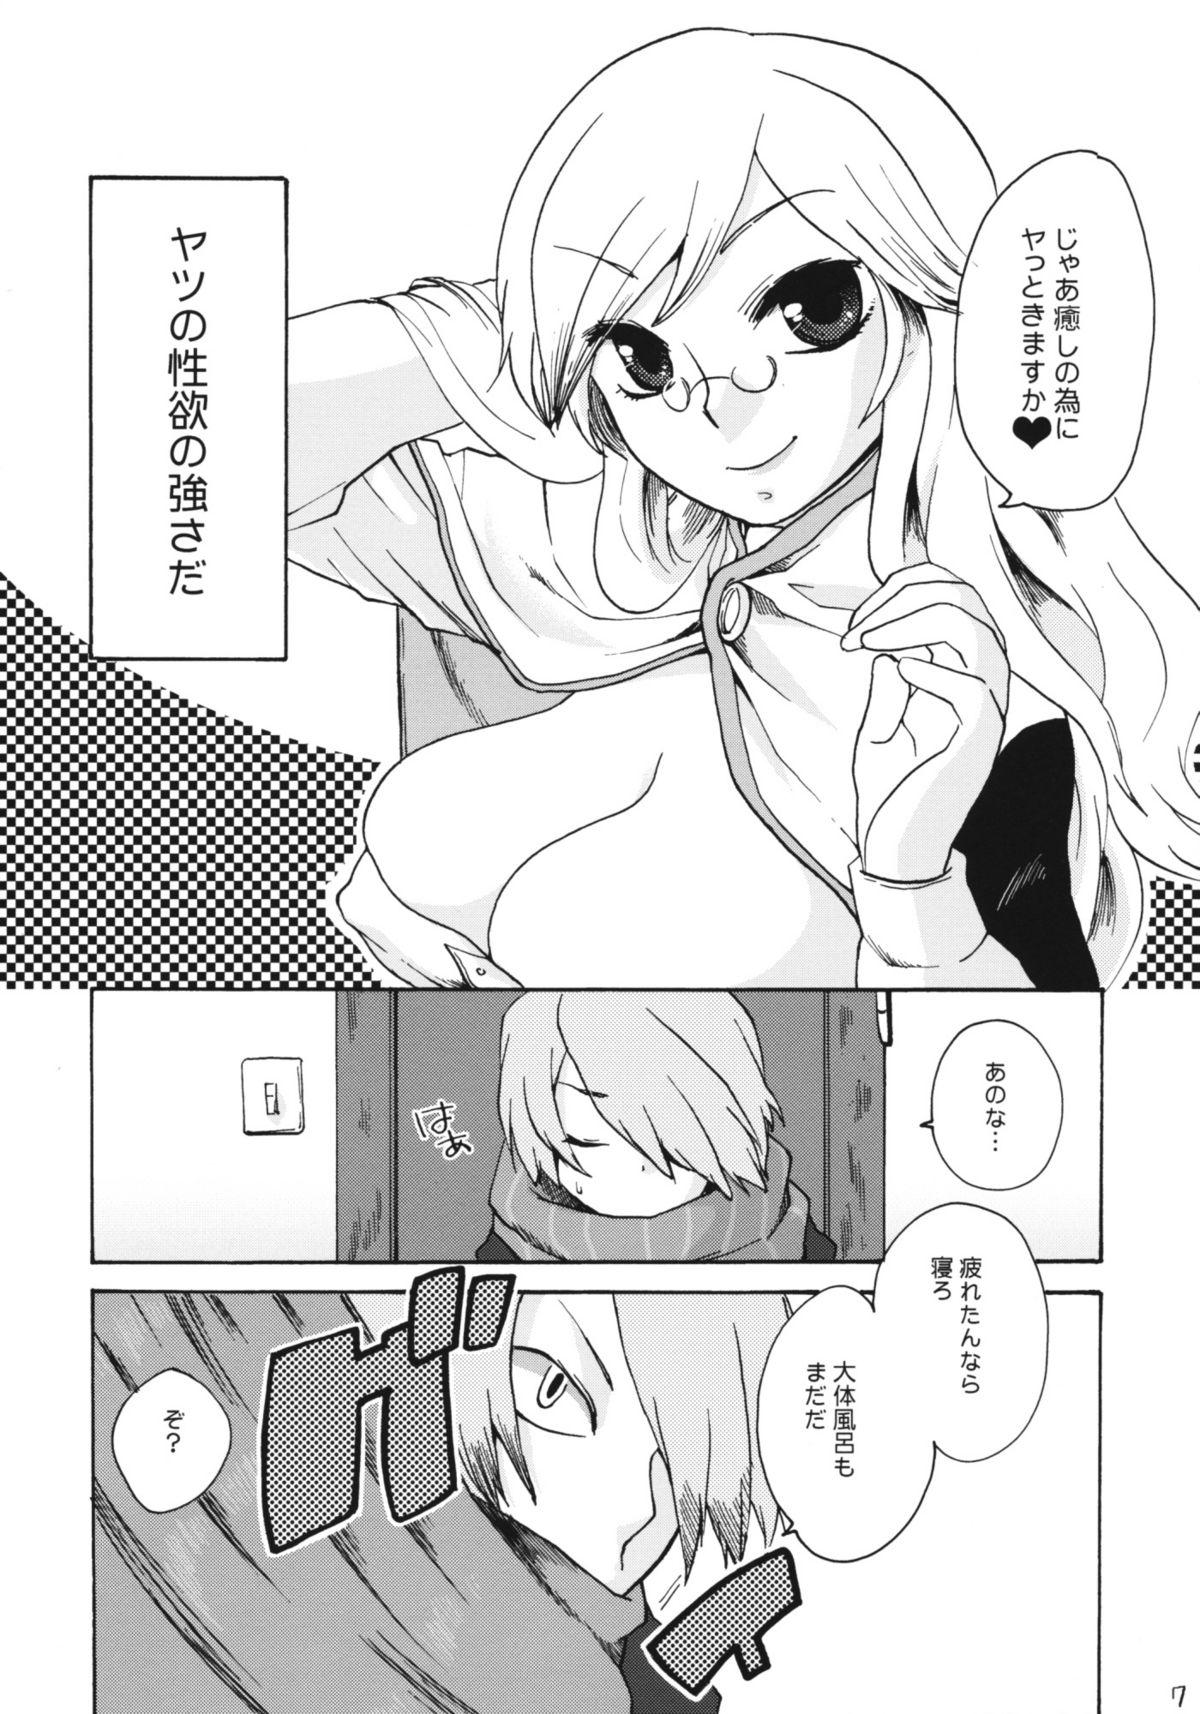 Fishnet In You And Me - 7th dragon White - Page 6